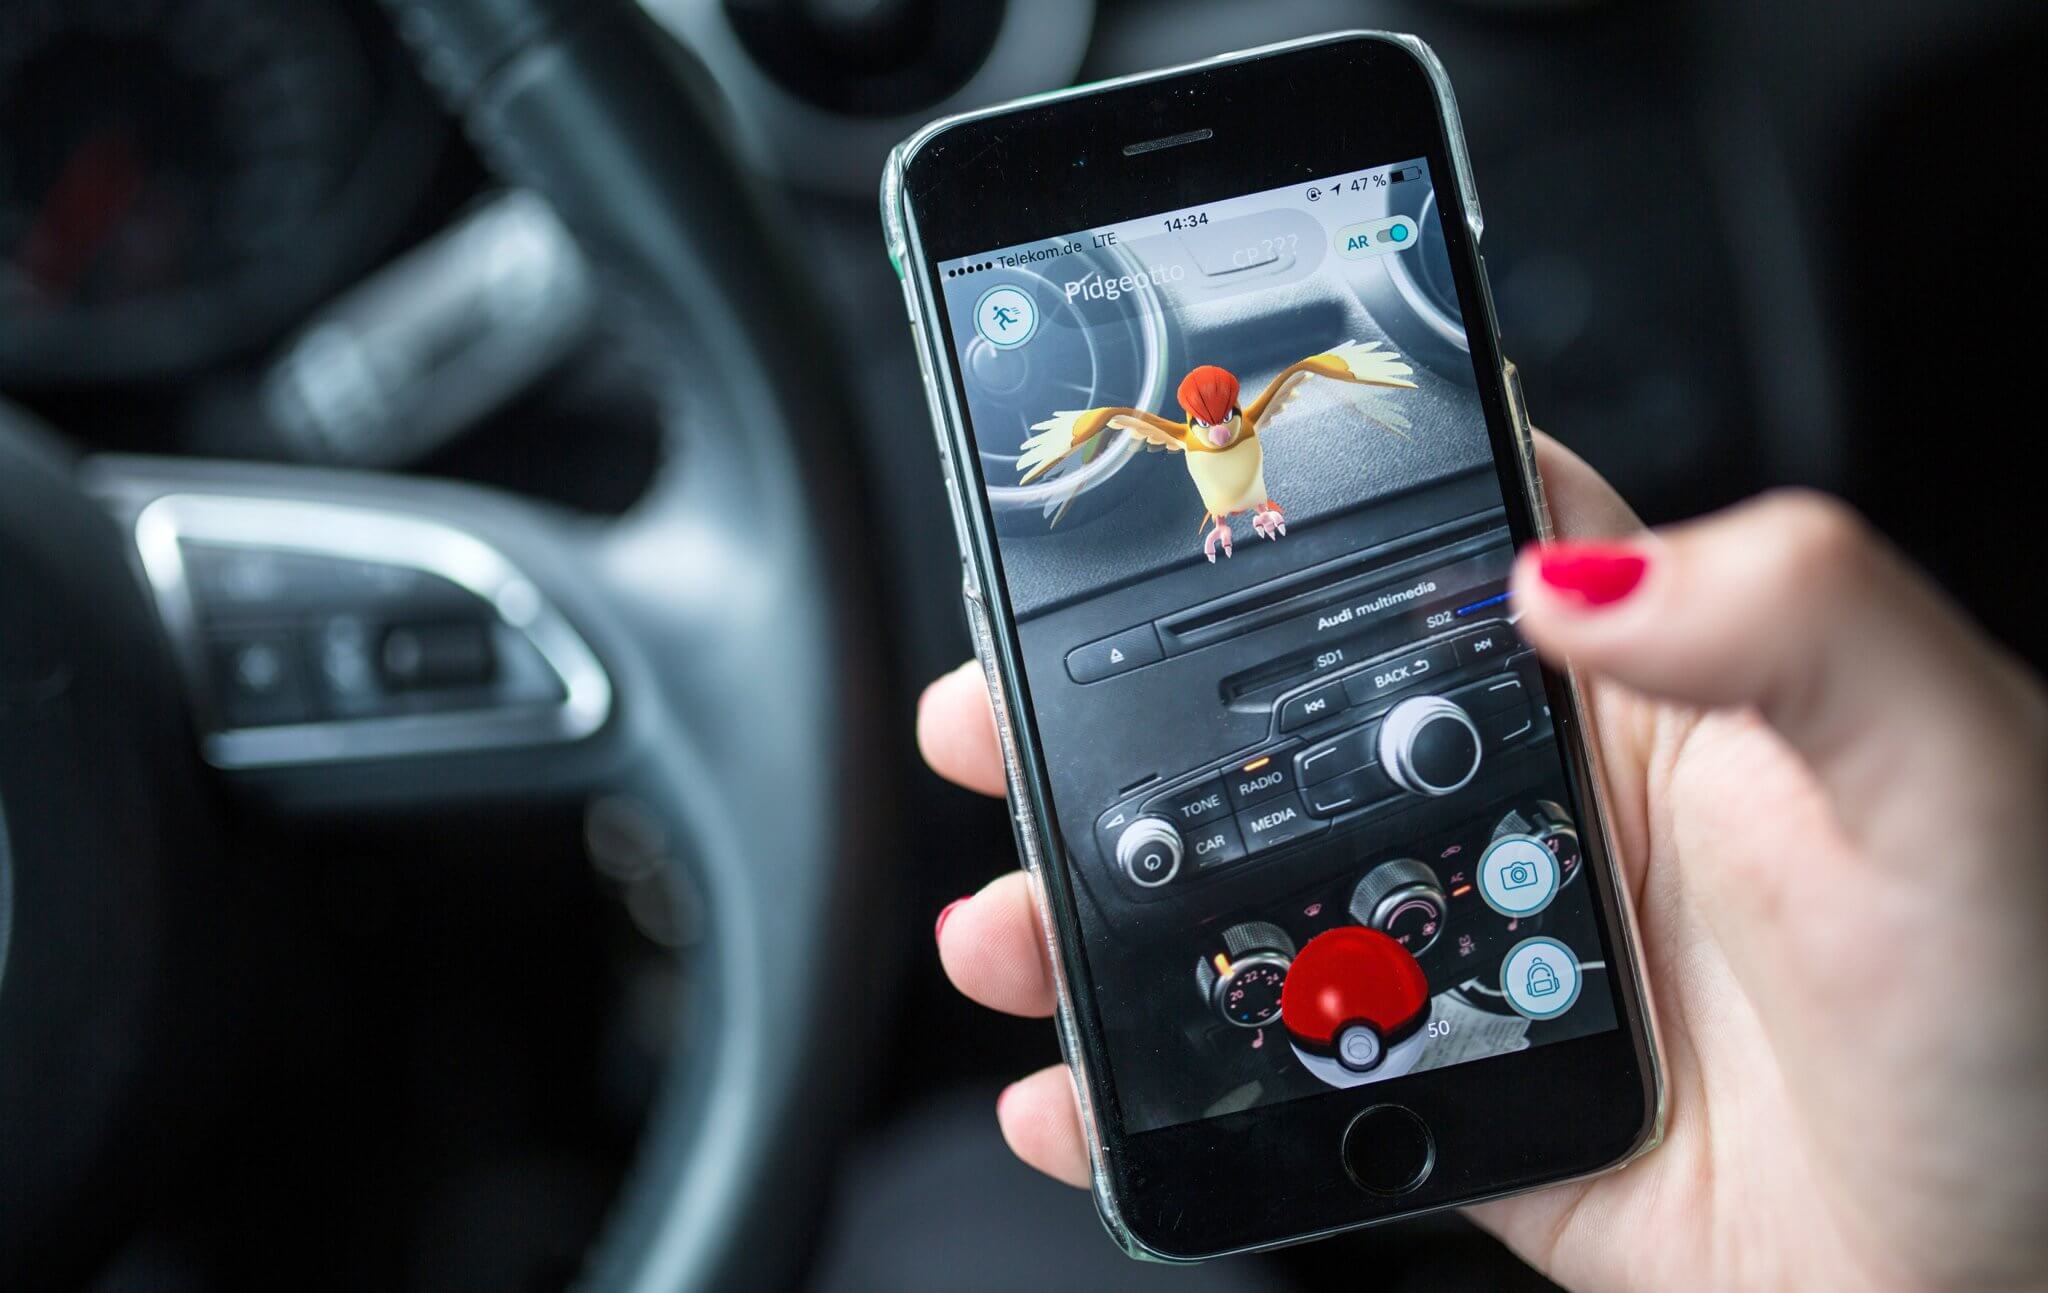 Pokemon Go Game Promoting Dangerous Distracted Driving